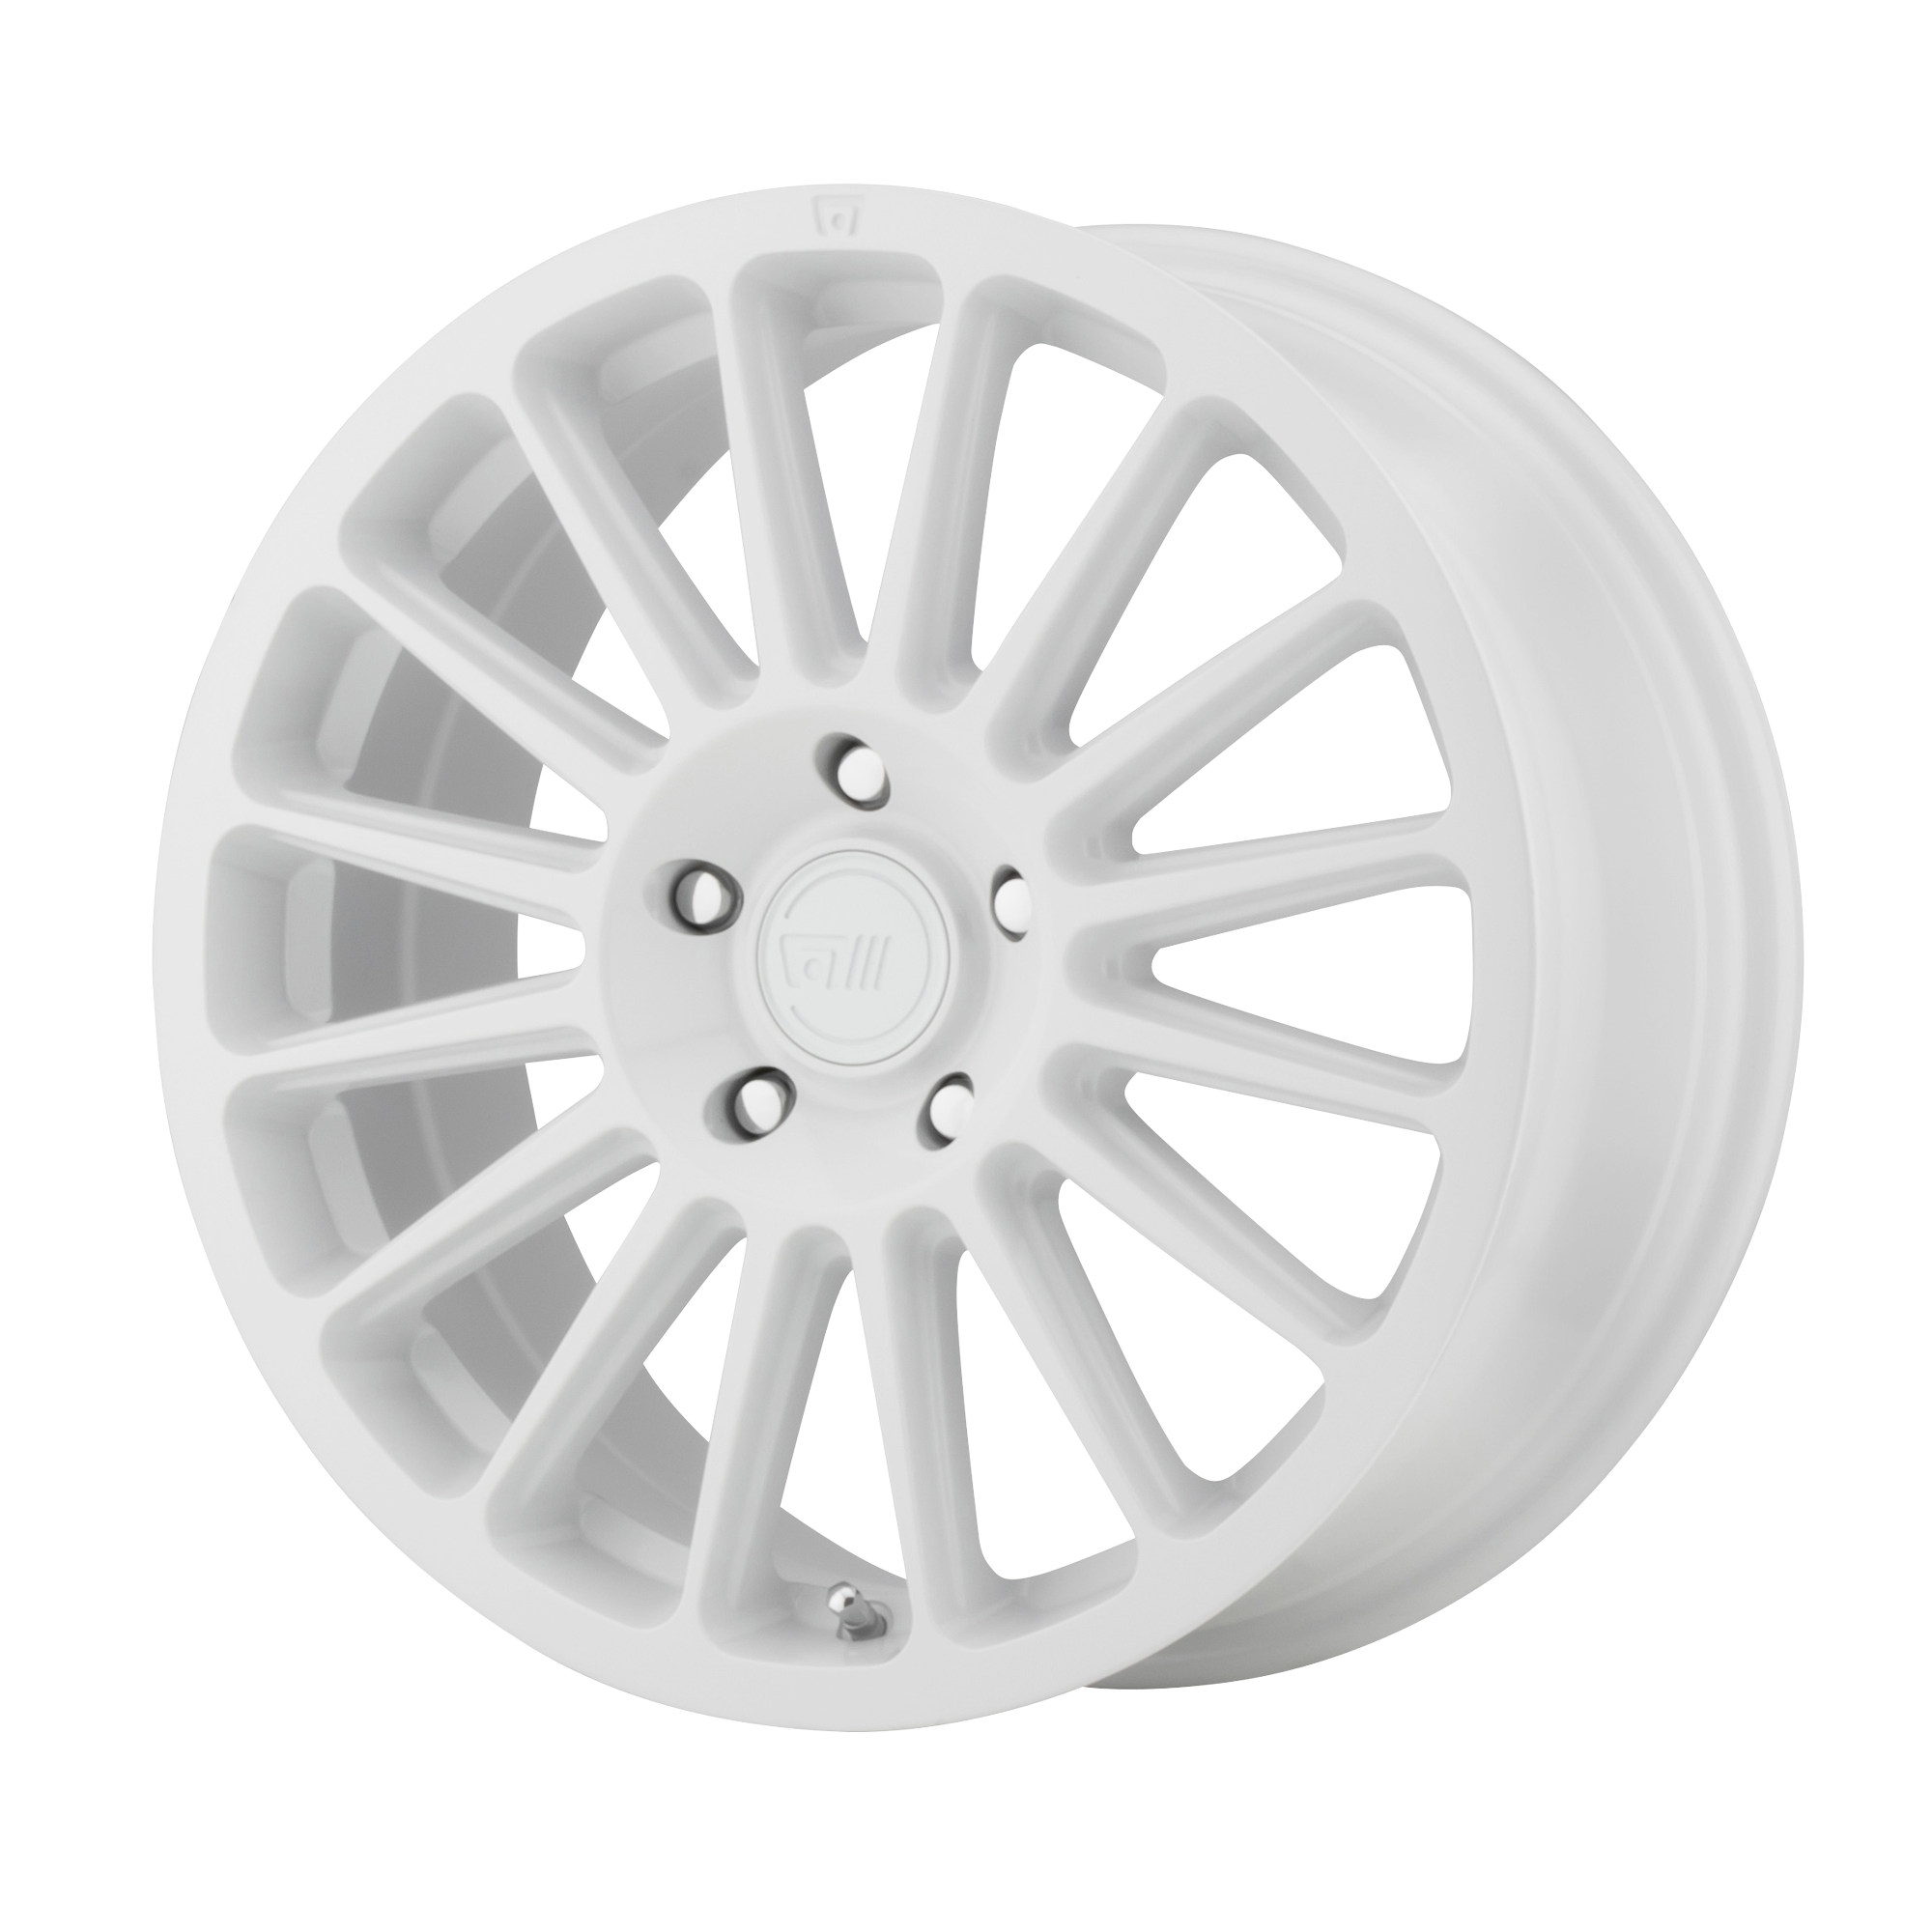 MR141 16x7.5 5x100.00 WHITE (40 mm) - Tires and Engine Performance